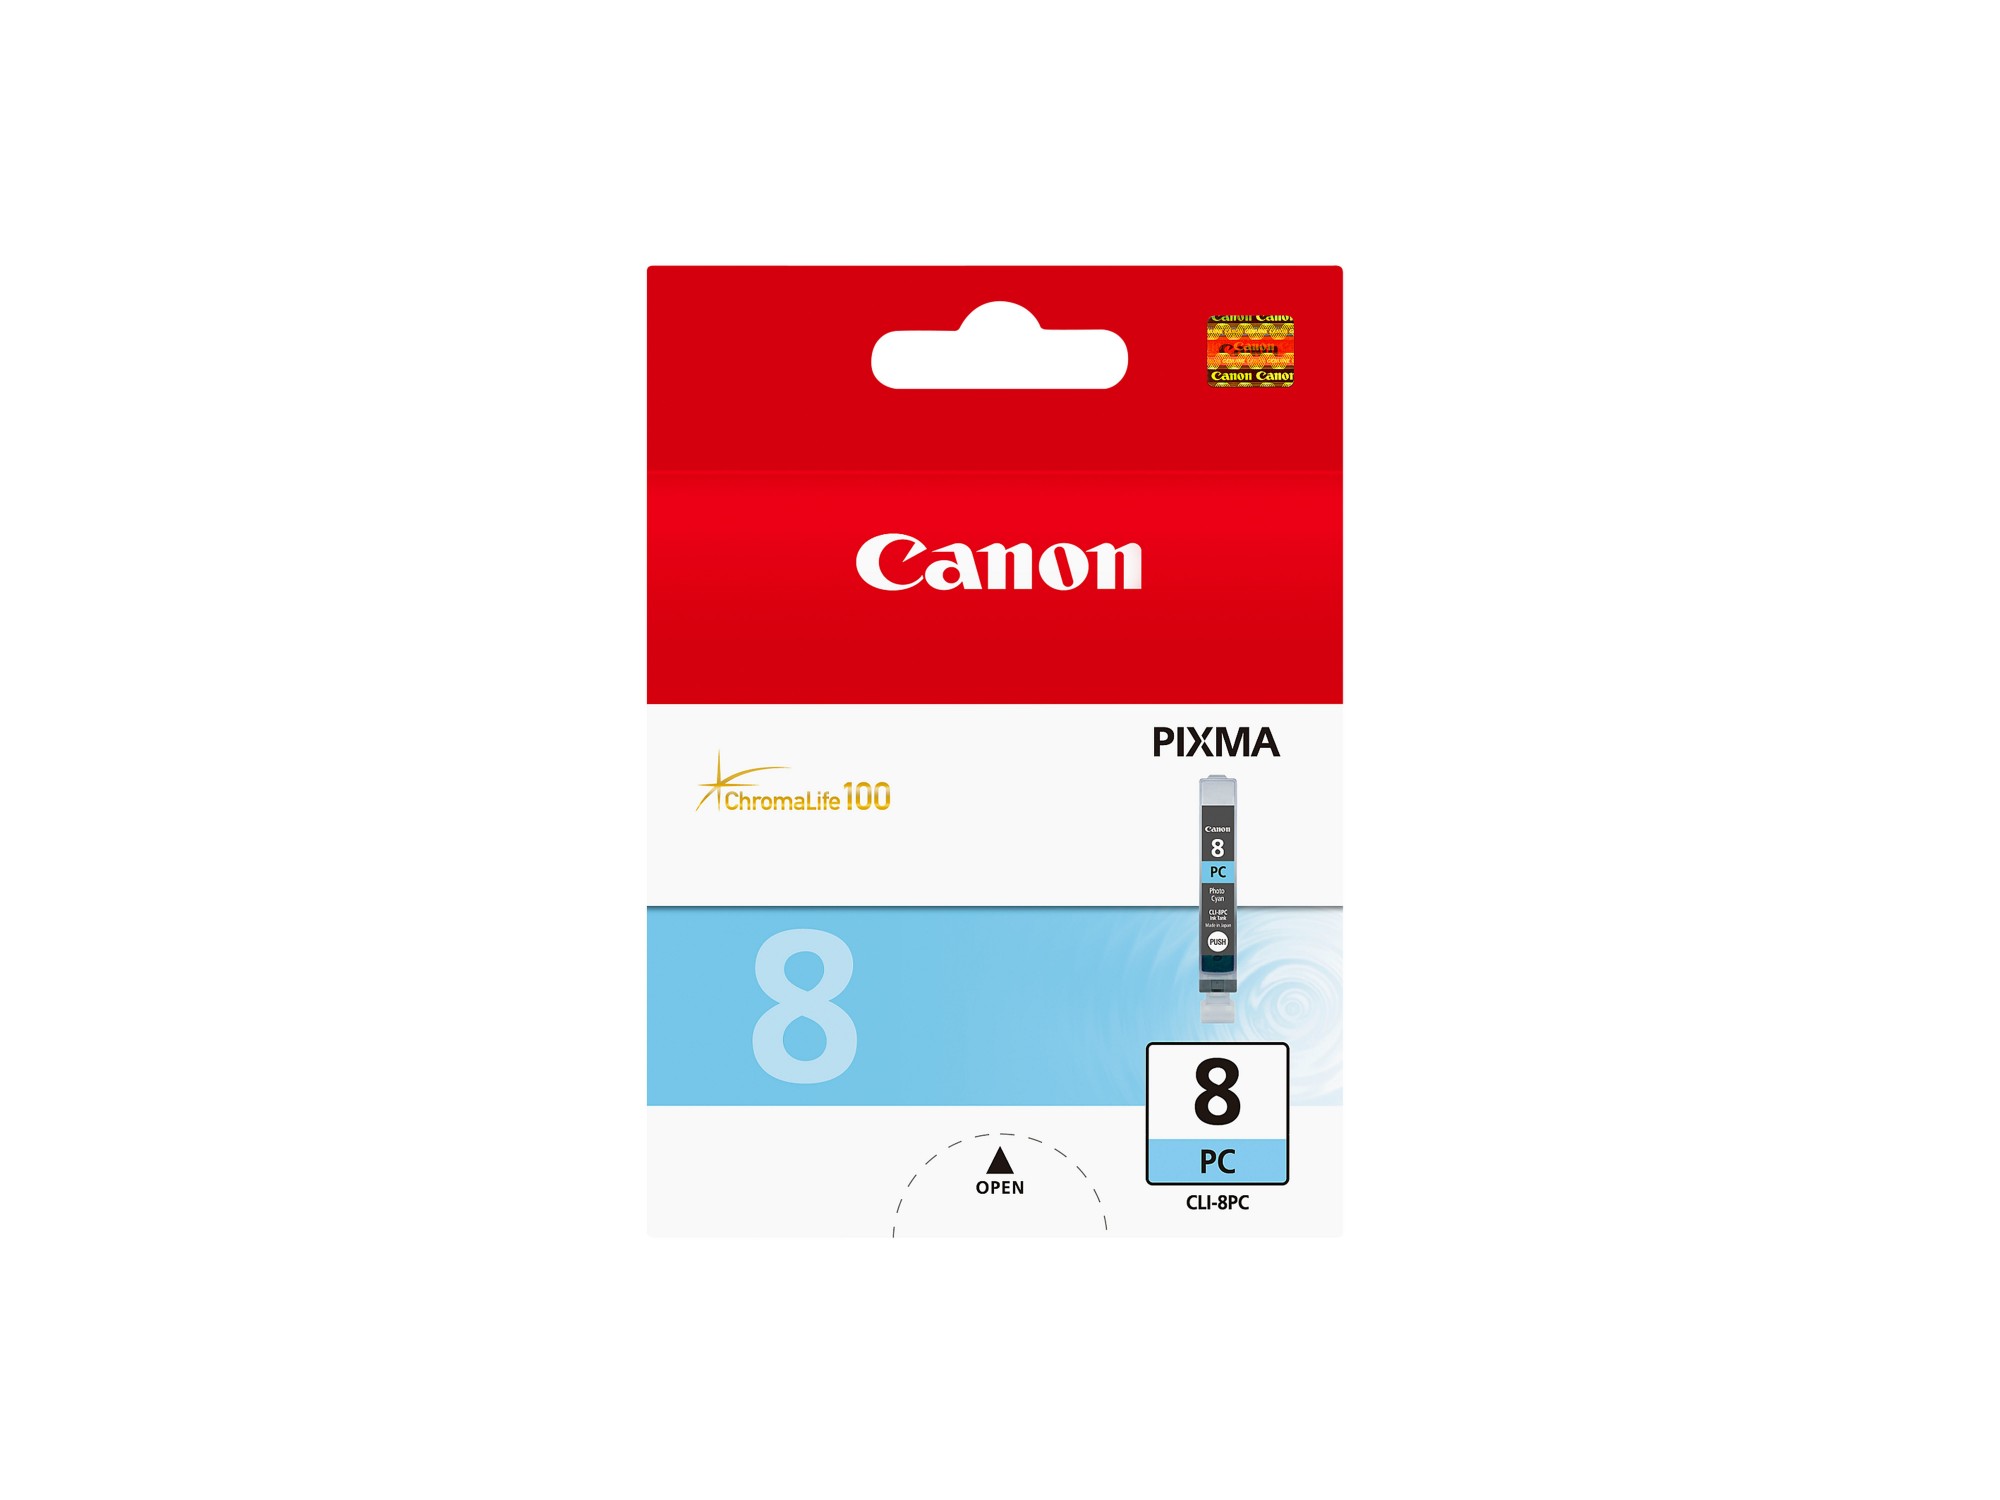 Canon 0624B001/CLI-8PC Ink cartridge bright cyan, 5.72K pages 13ml for Canon Pixma IP 6600/MP 960/Pro 9000